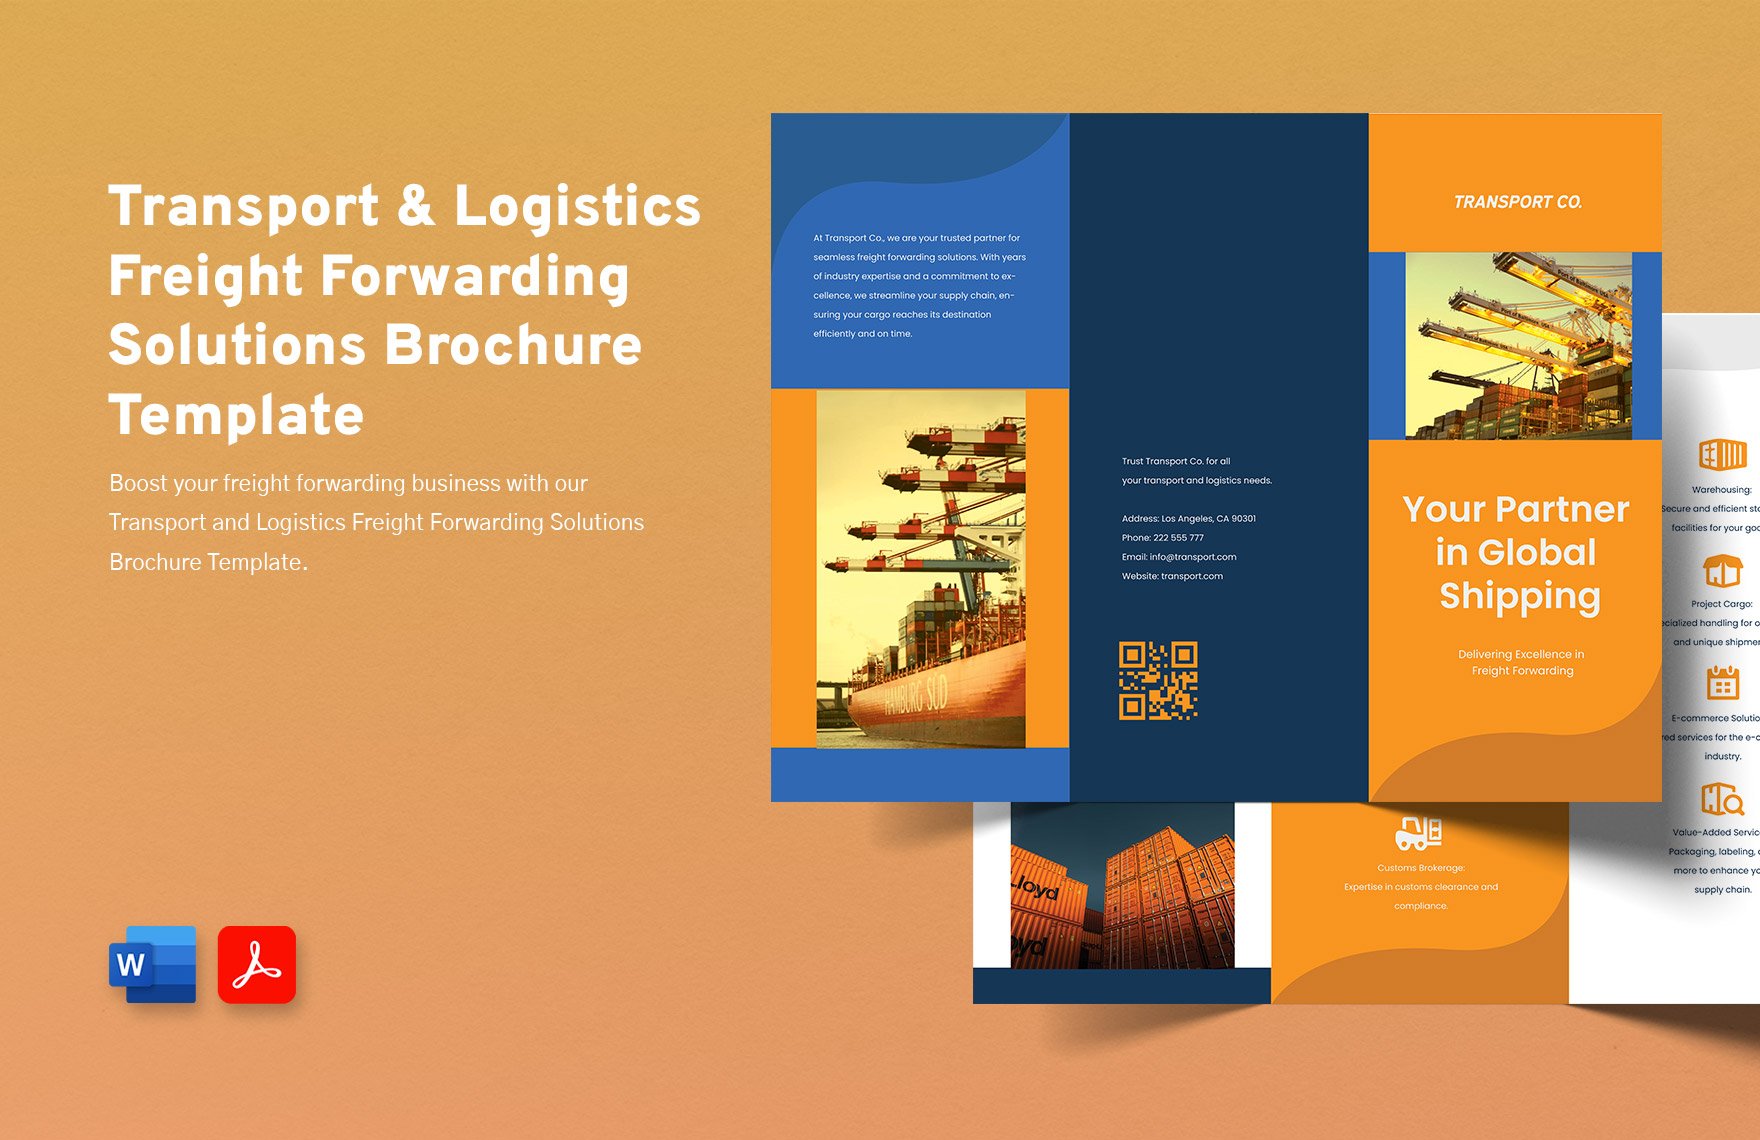 Transport and Logistics Freight Forwarding Solutions Brochure Template